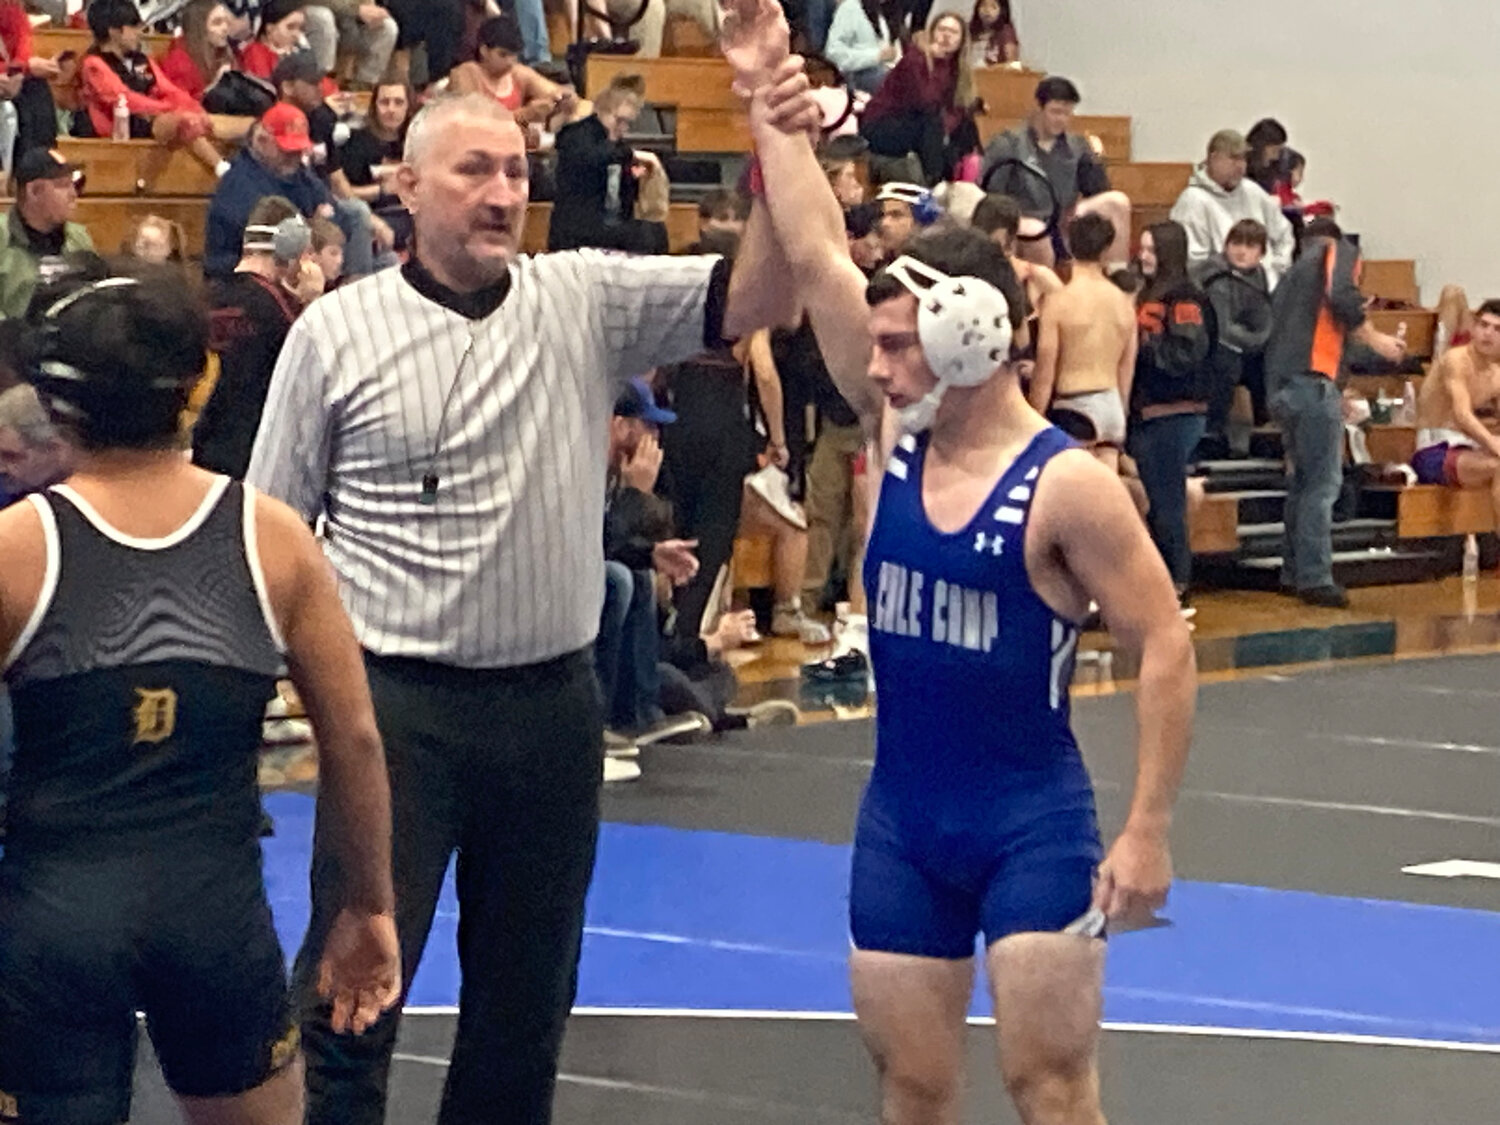 COLE CAMP sophomore Grant Rodriguez had his hand raised at a recent wrestling tournament in Lone Jack. Rodriguez was an All-Conference and All-District running back for the Bluebirds in the fall and will take over at QB for Coach Shearer next season.